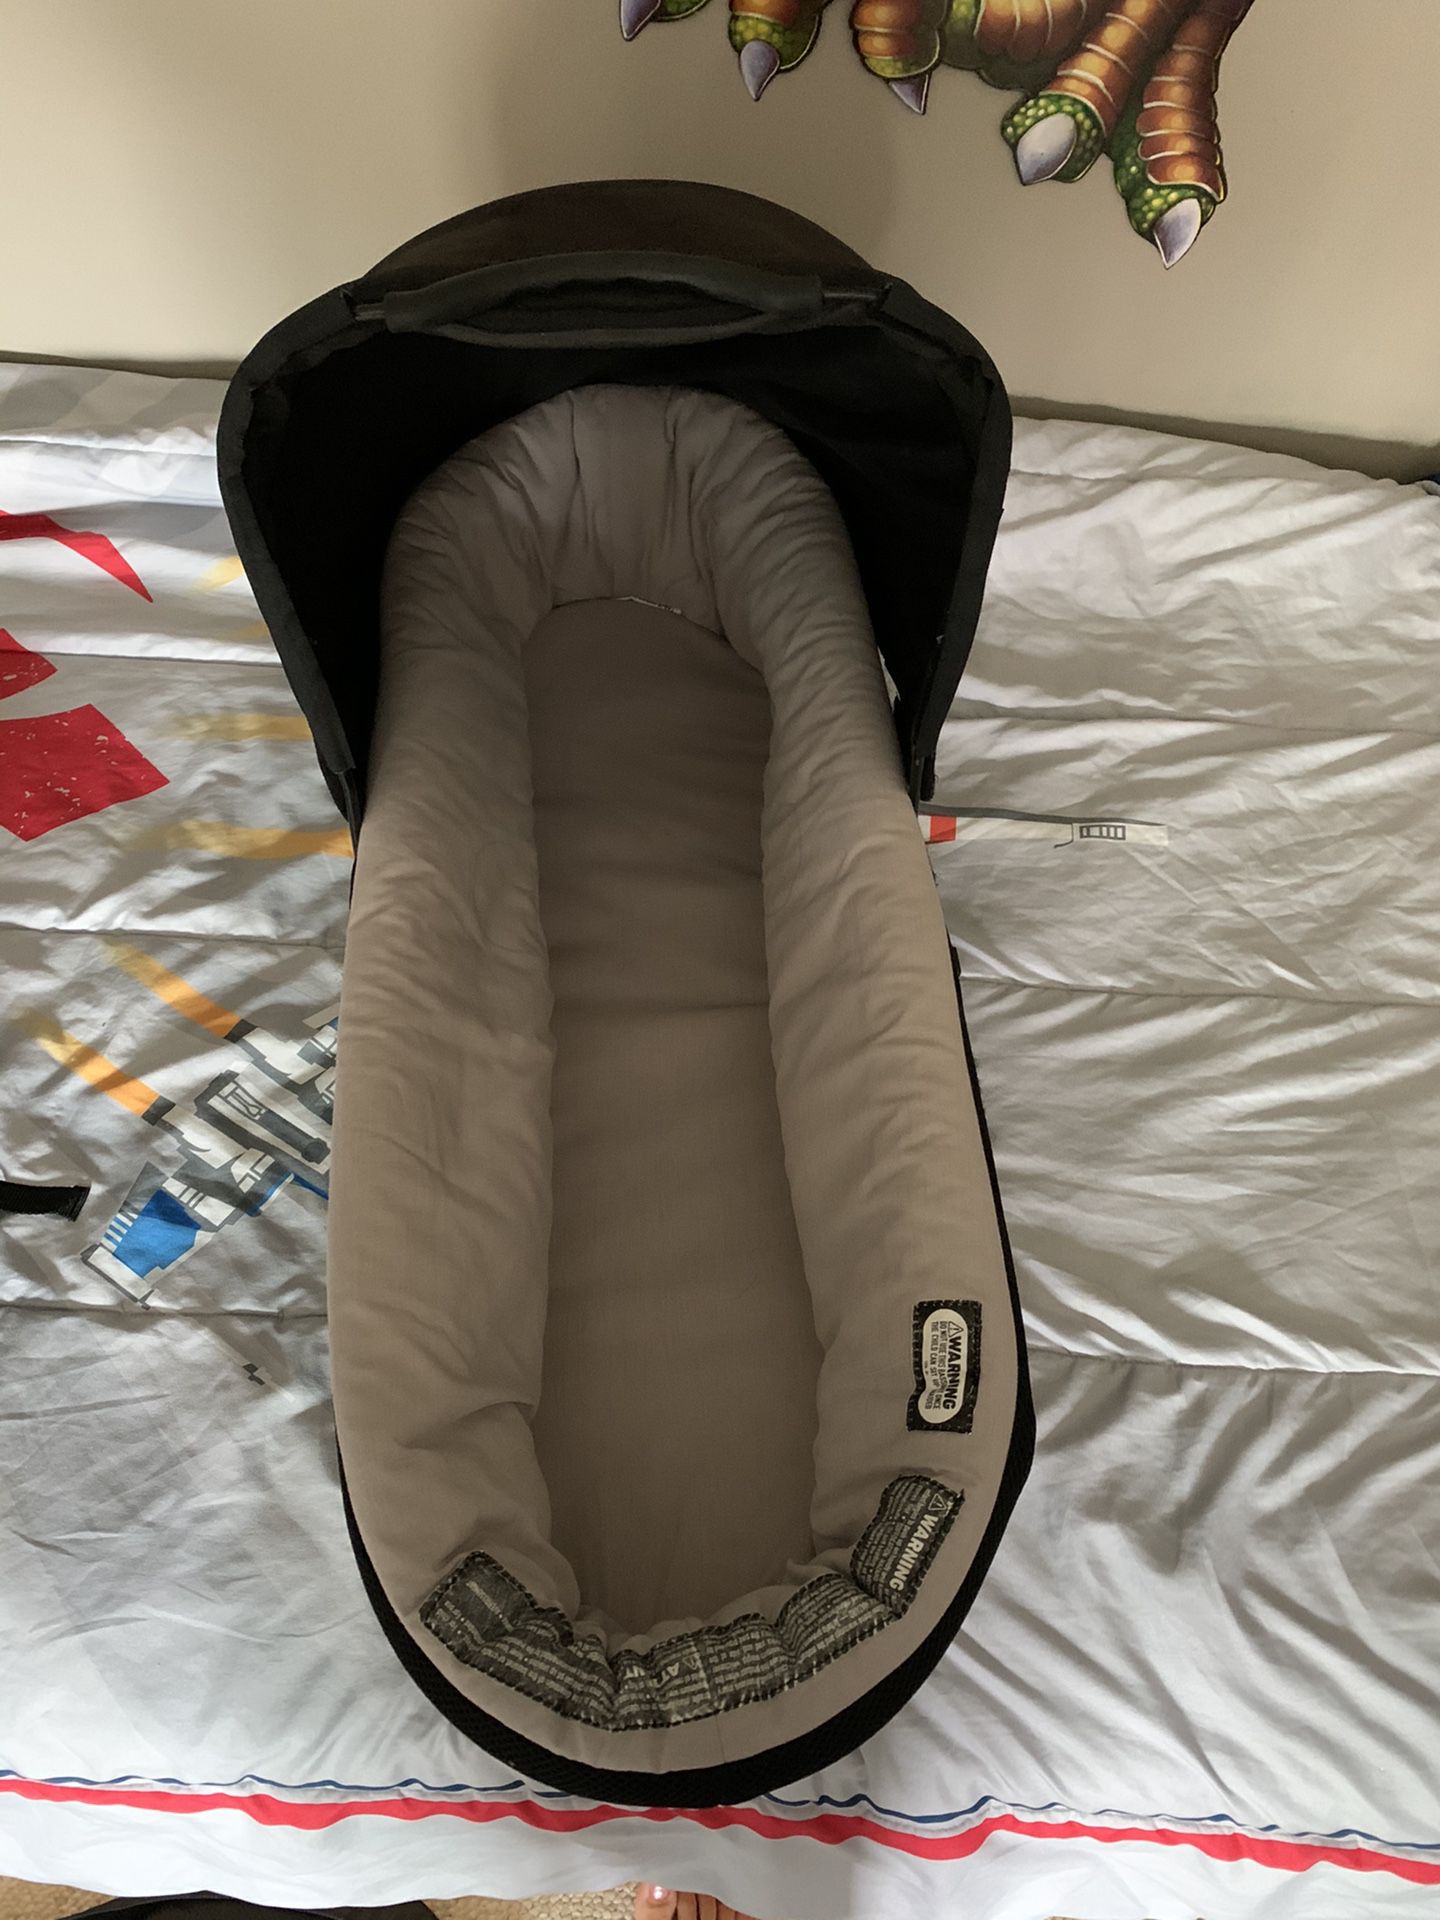 Carrycot mountain buggy